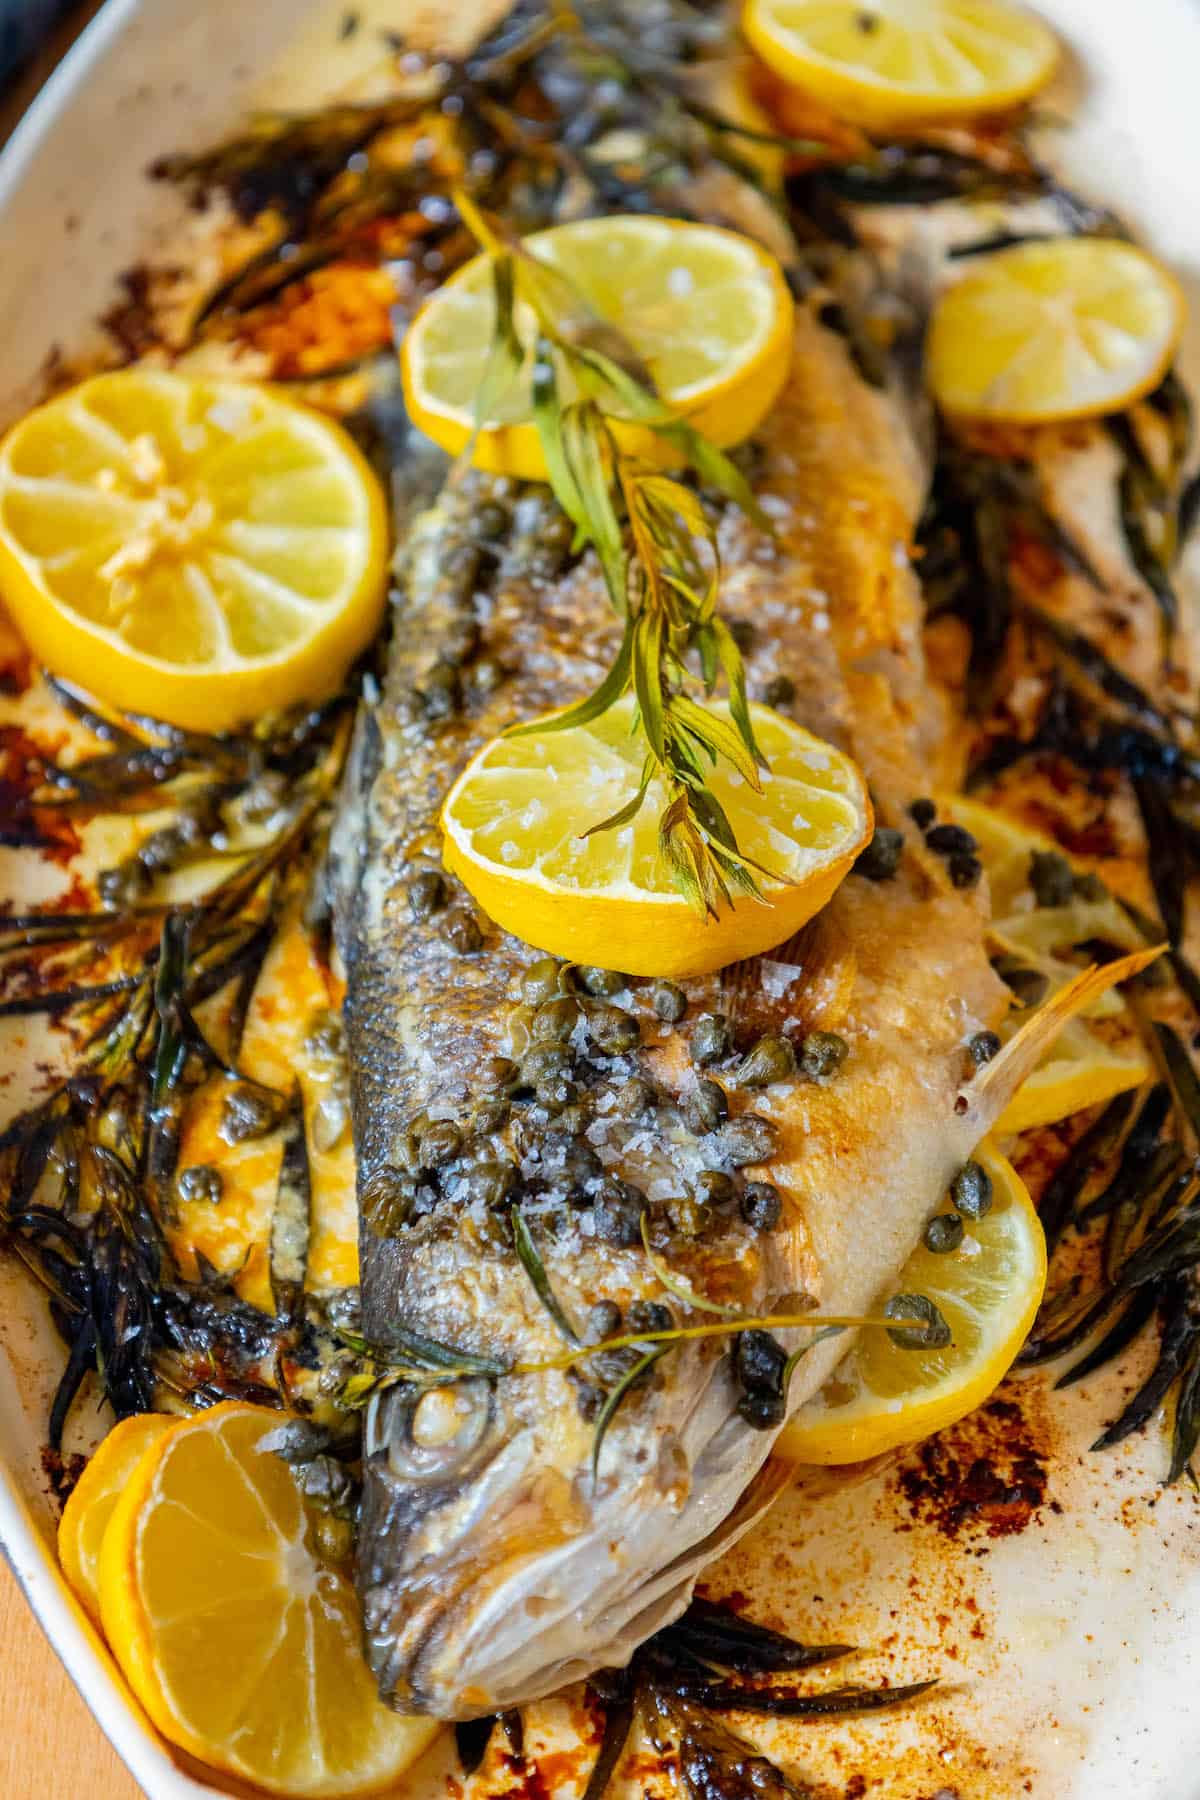 A roasted Branzino served with lemon slices and herbs on a plate.